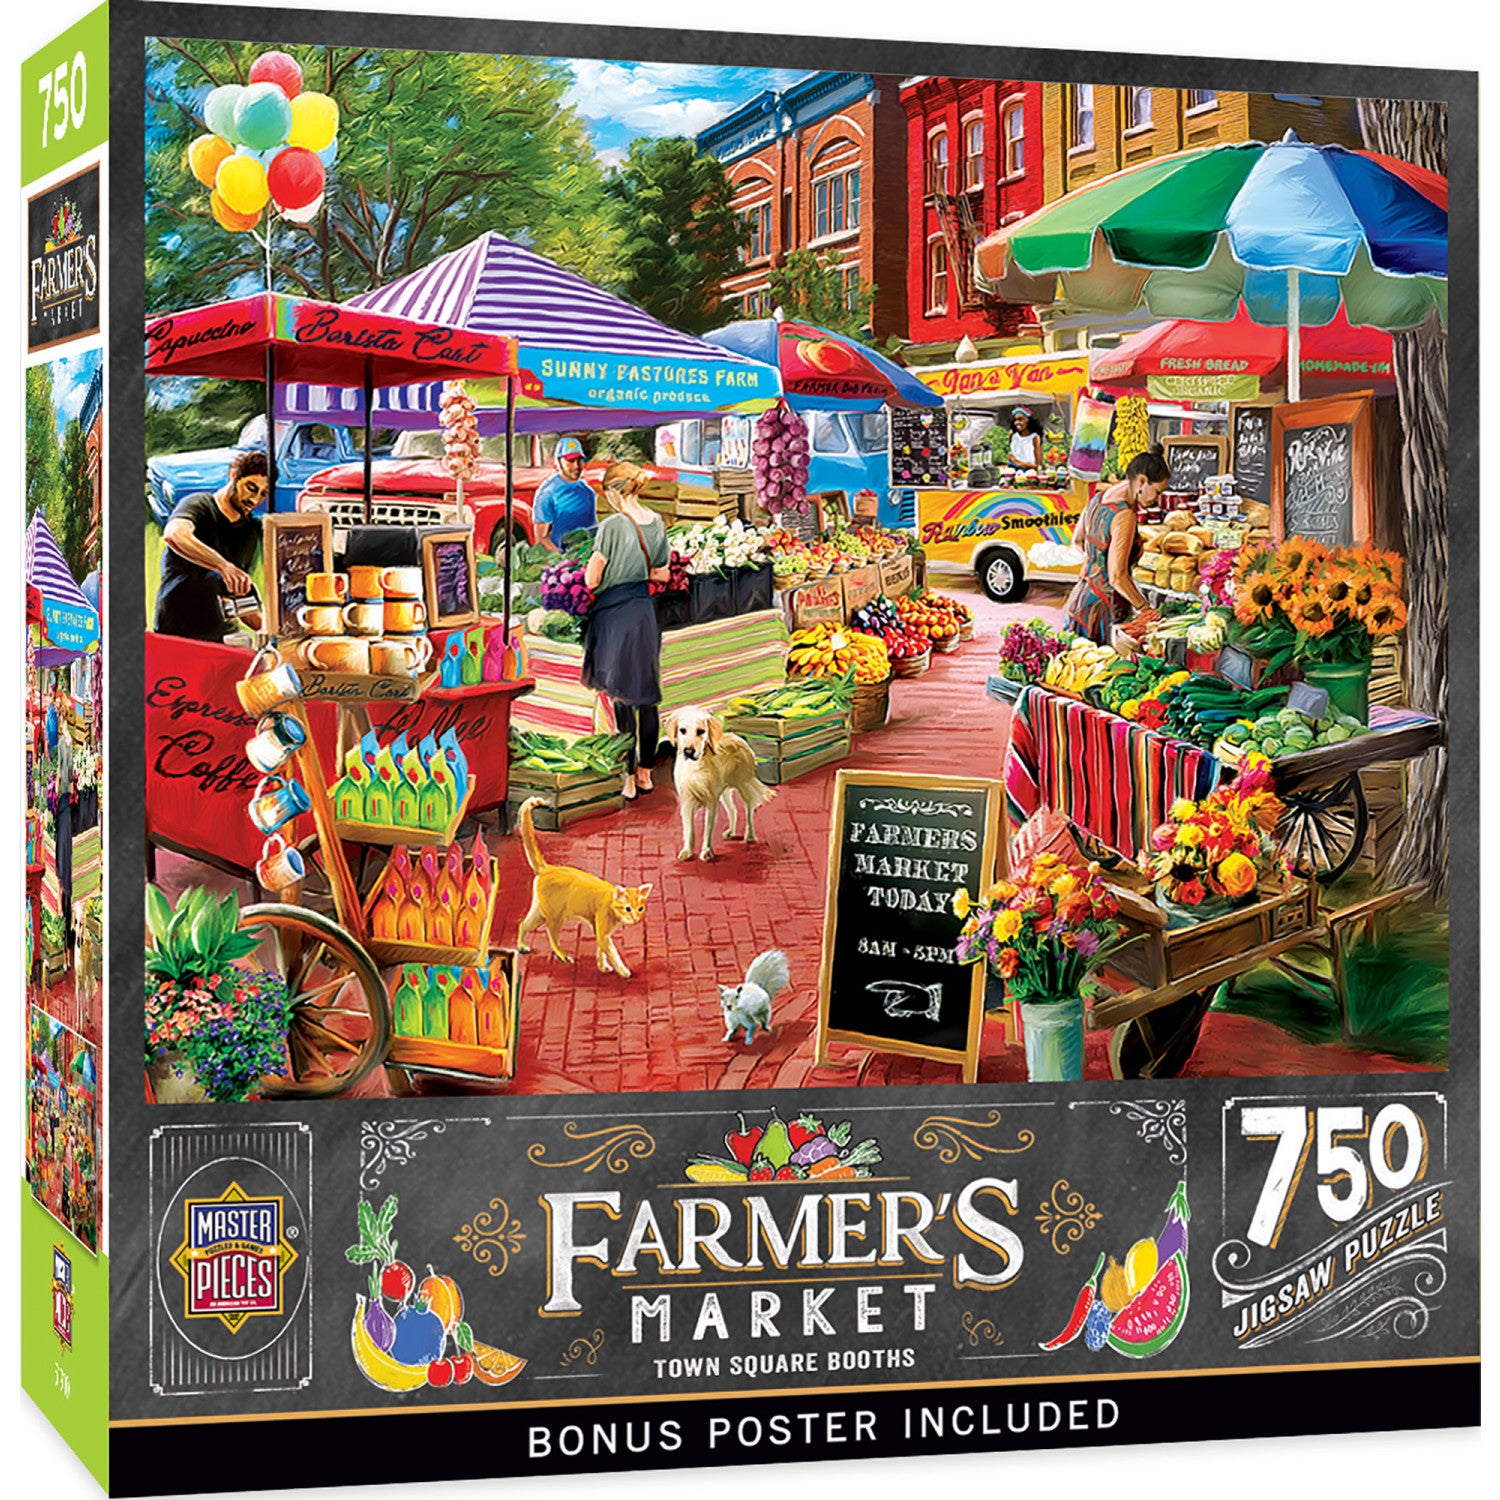 Farmer's Market - Town Square Booths 750 Piece Jigsaw Puzzle